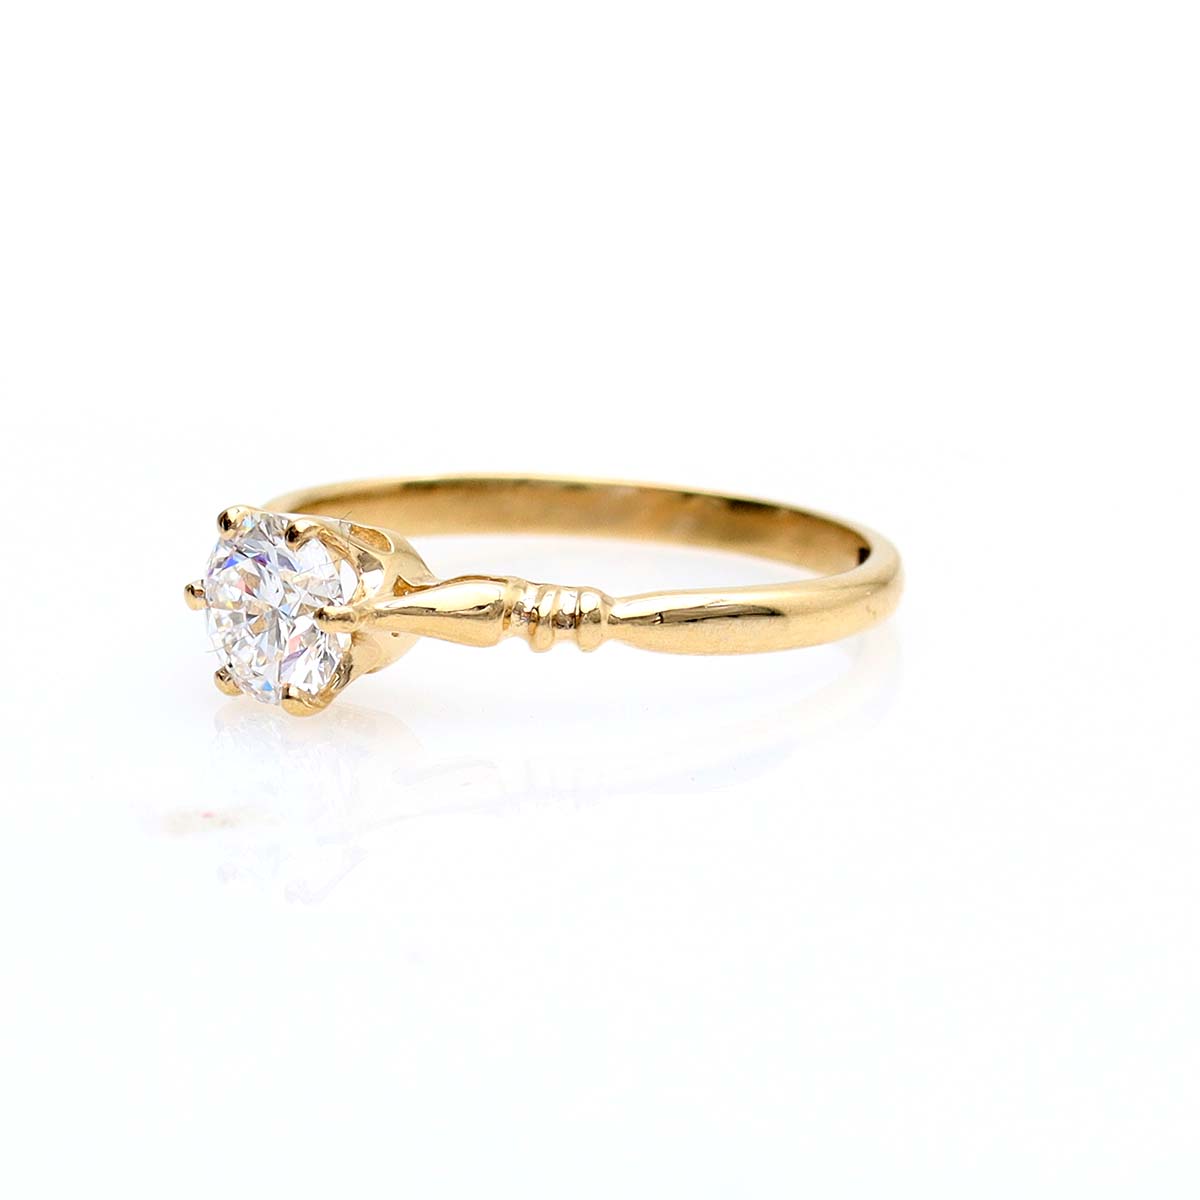 The Newport Edwardian Inspired Engagement Ring #3653-2